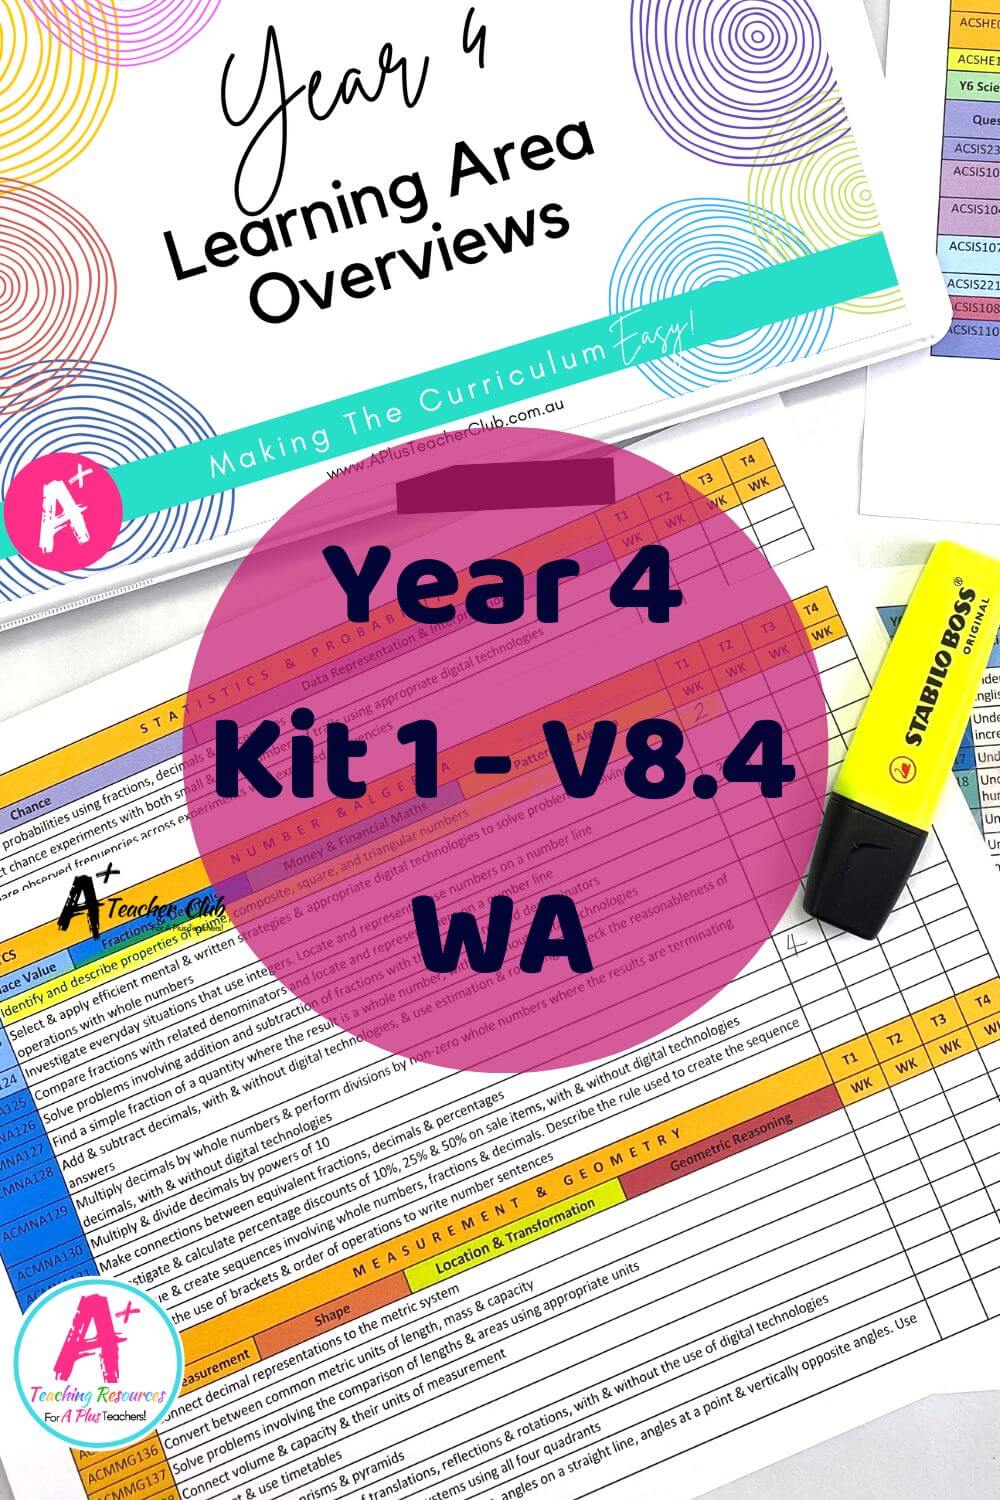 Year 4 Forward Planning Curriculum Overview WA V8.4